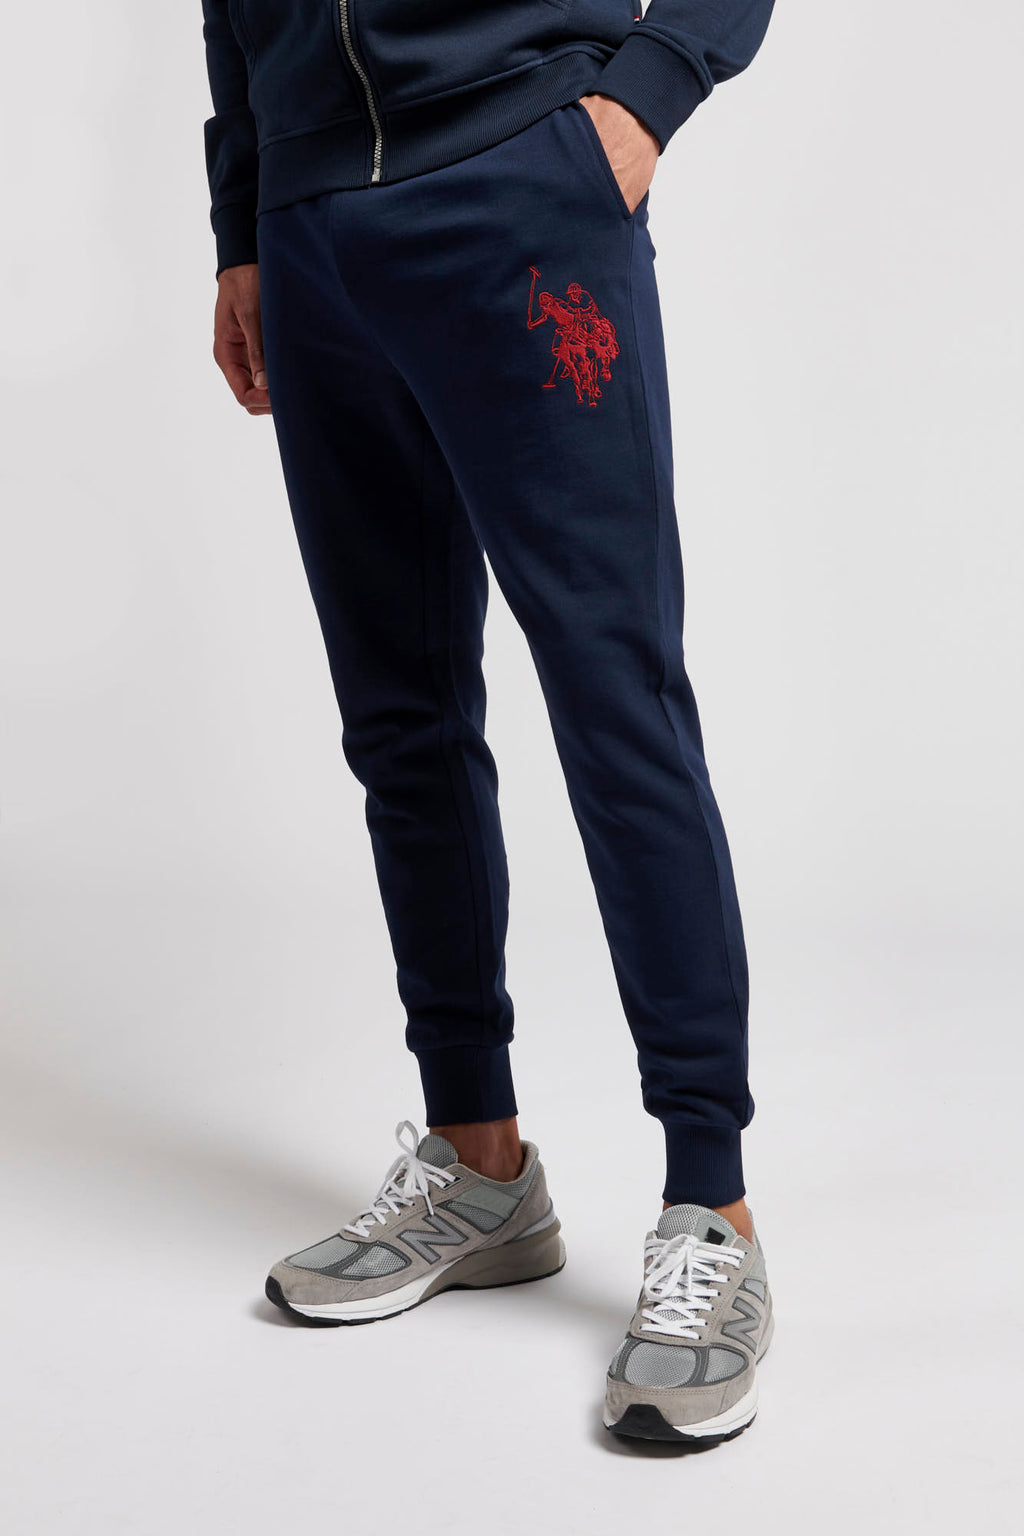 U.S. Polo Assn. Mens Block Flag Graphic Joggers in Navy Blue